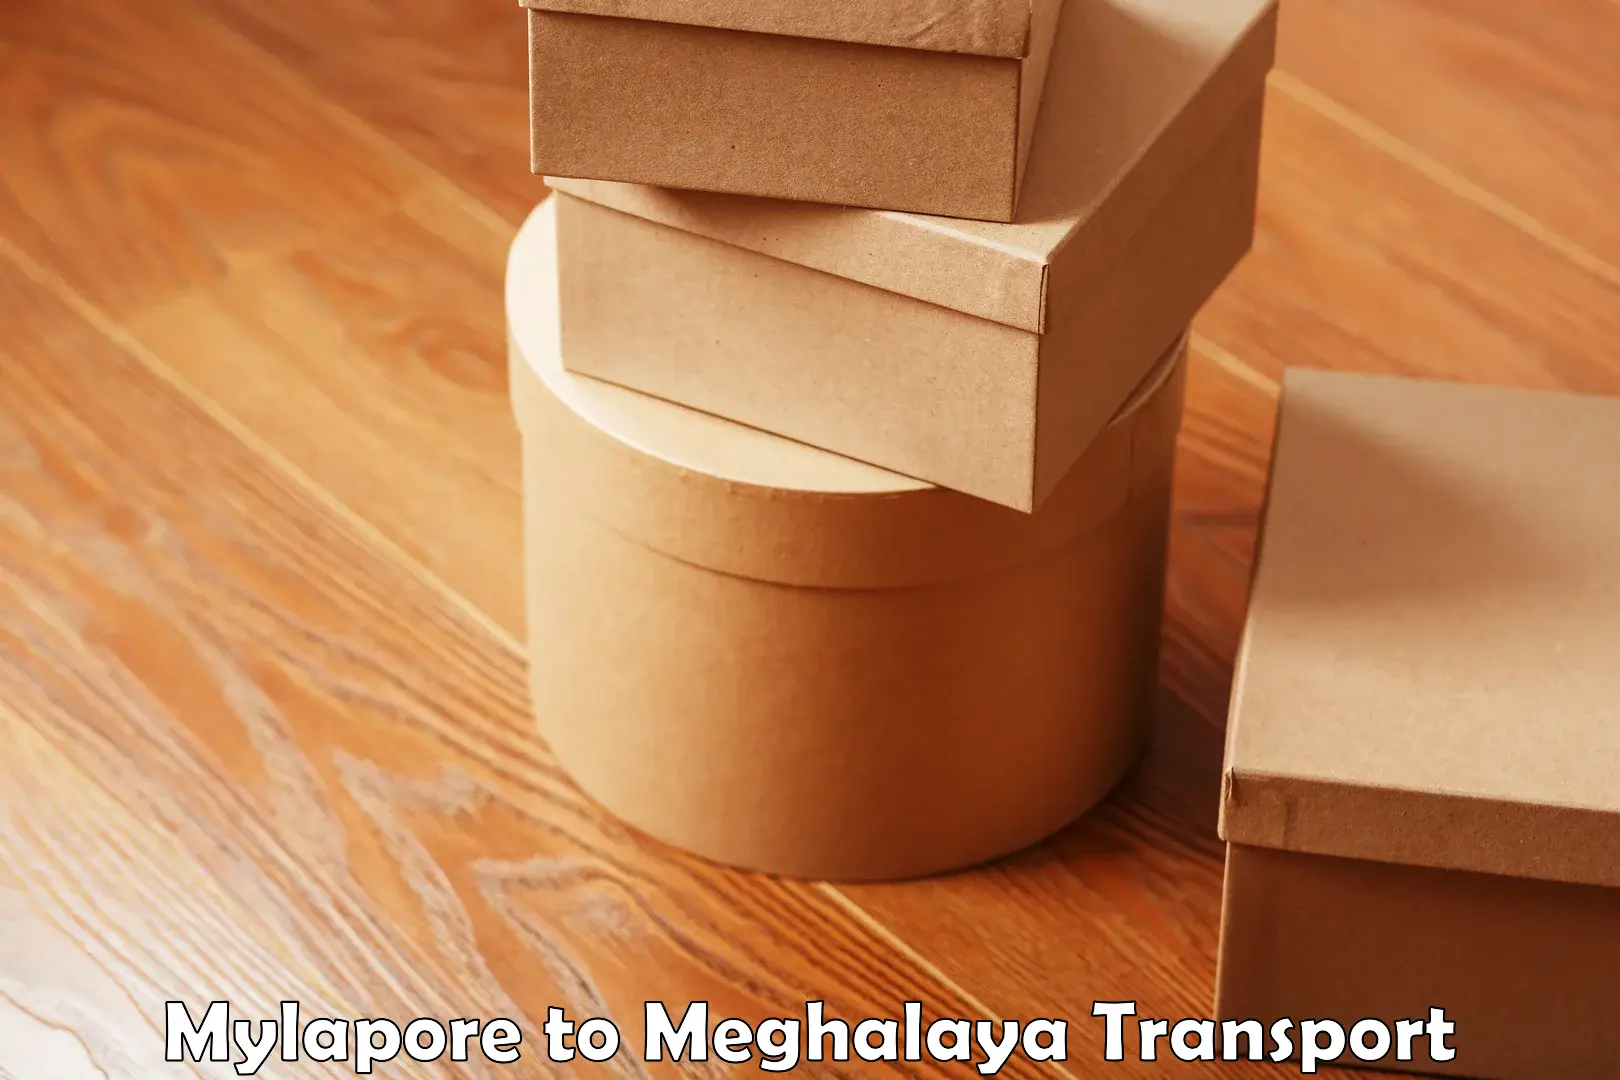 Furniture transport service Mylapore to Shillong